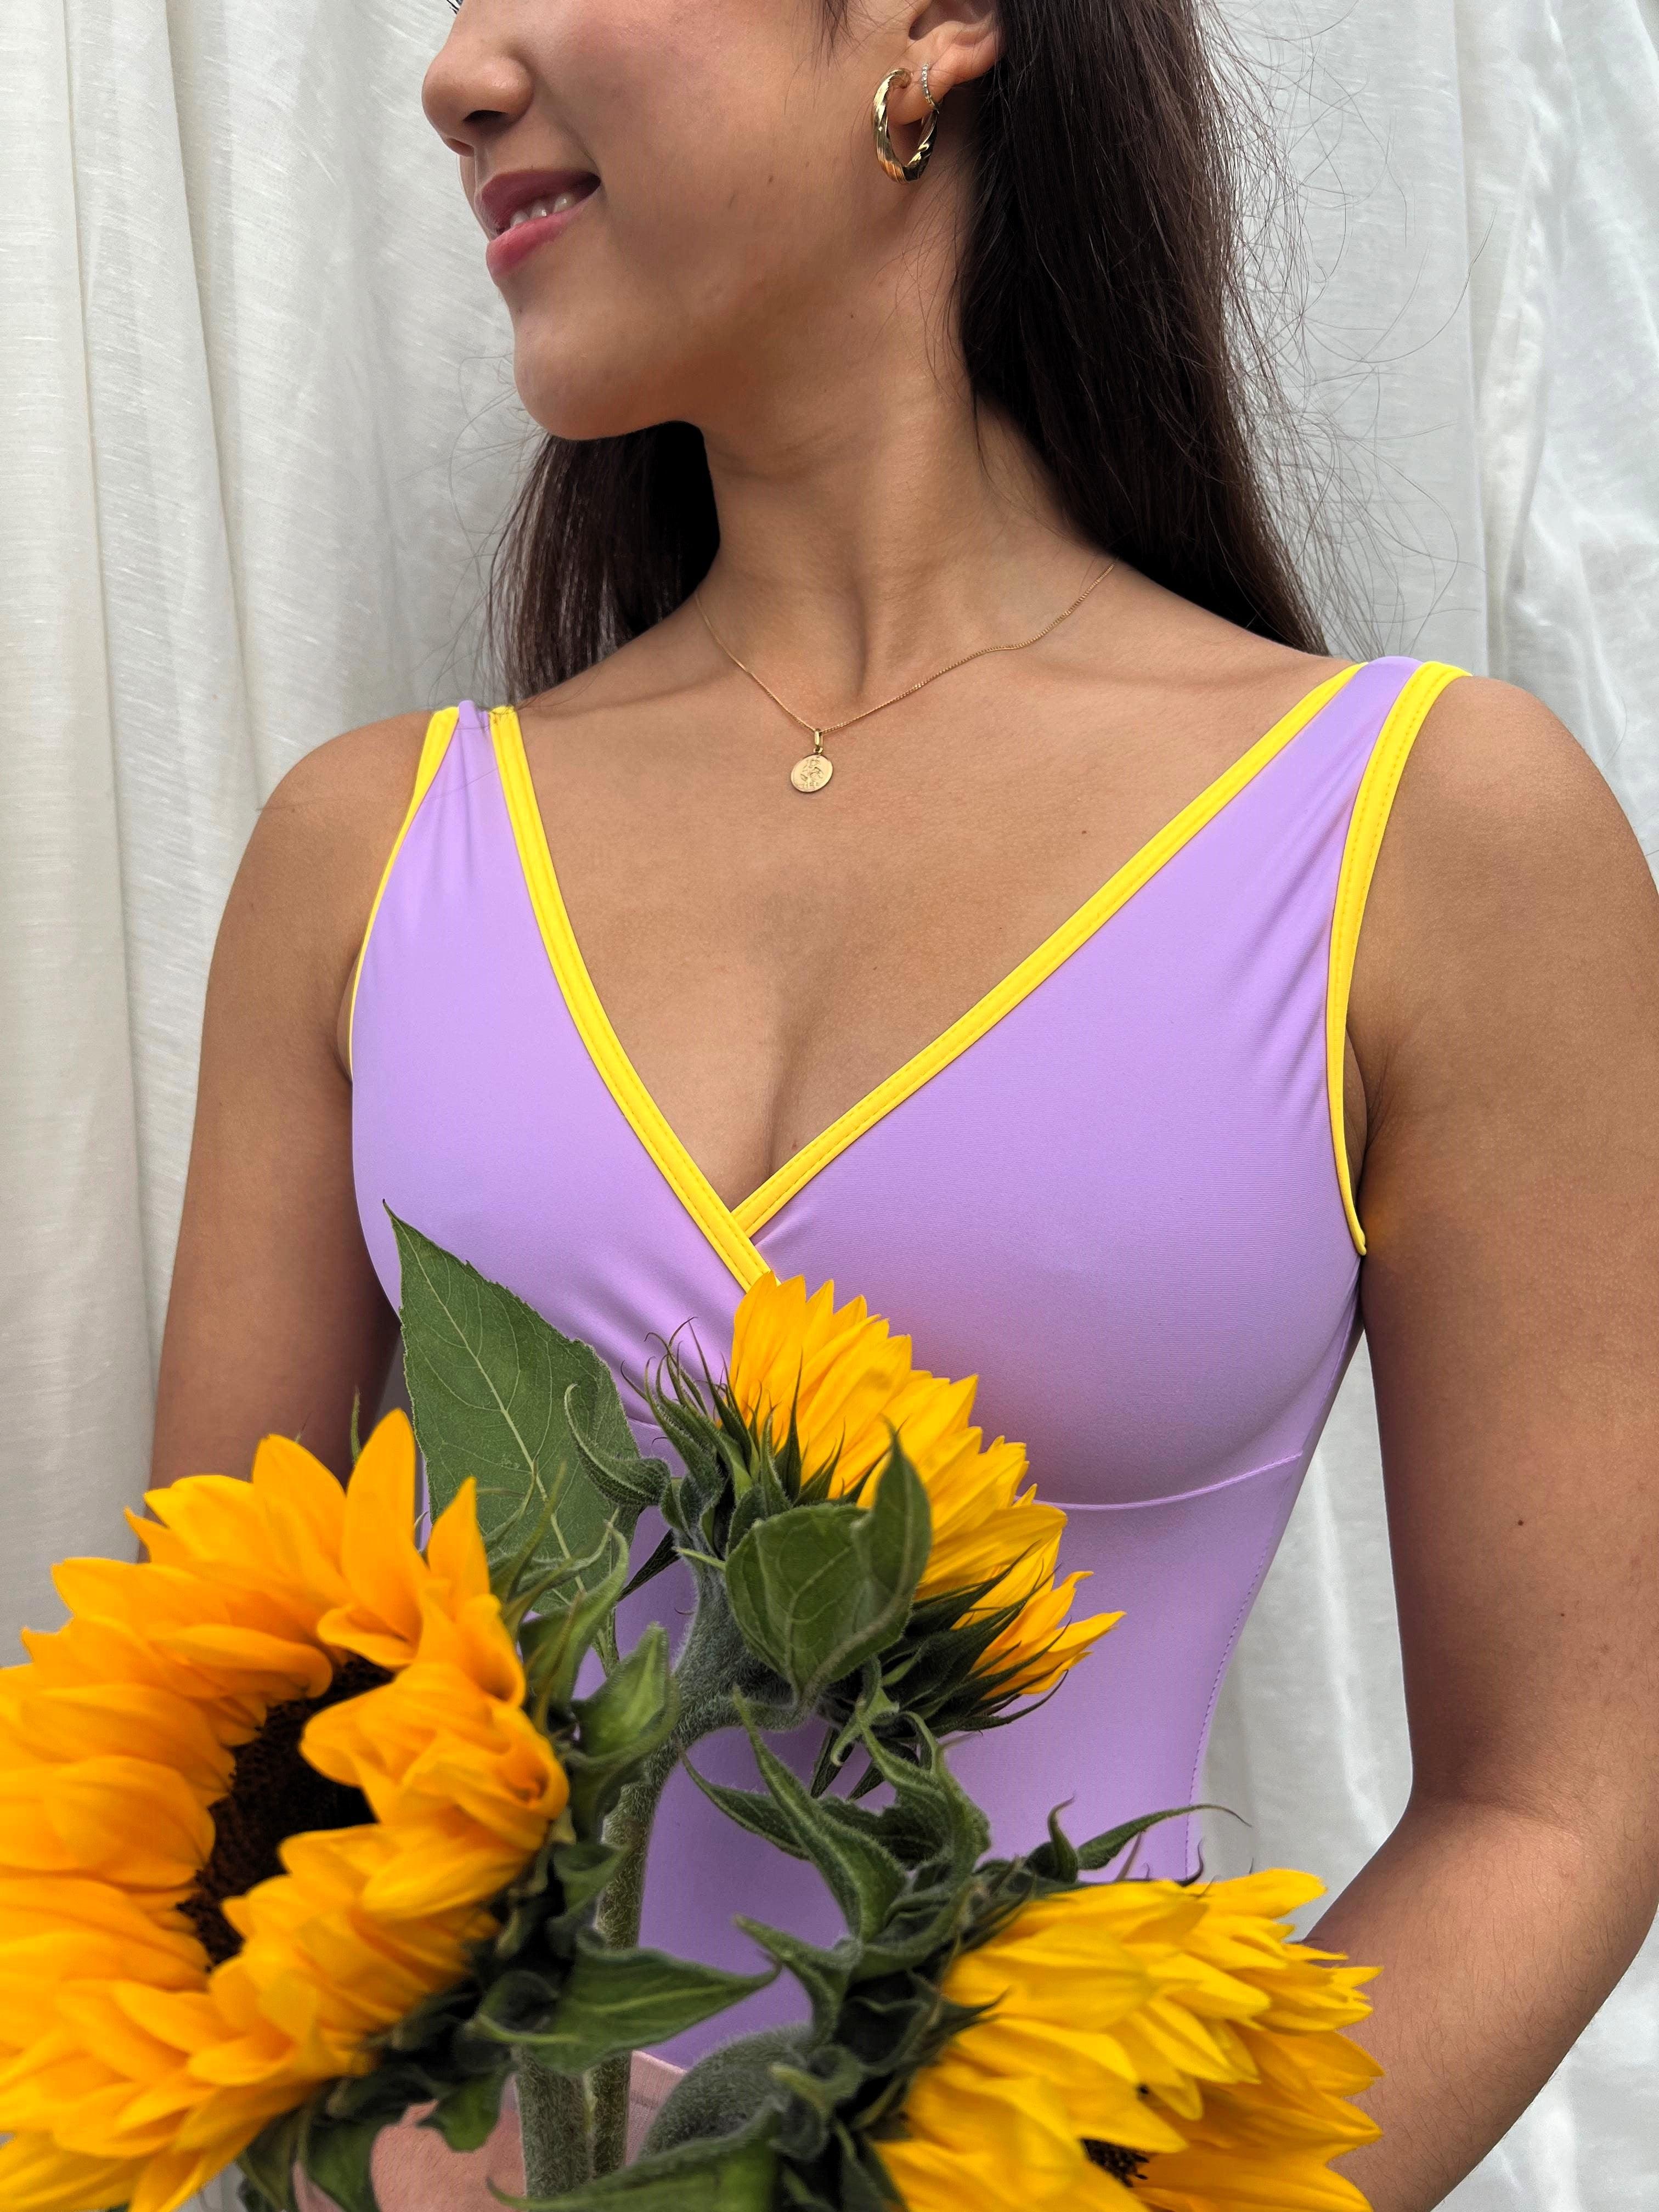 Women's Marseille Wrap Front Leotard - Lavender with sunflower trim - Ready to Ship, Sleeveless - Imperfect Pointes